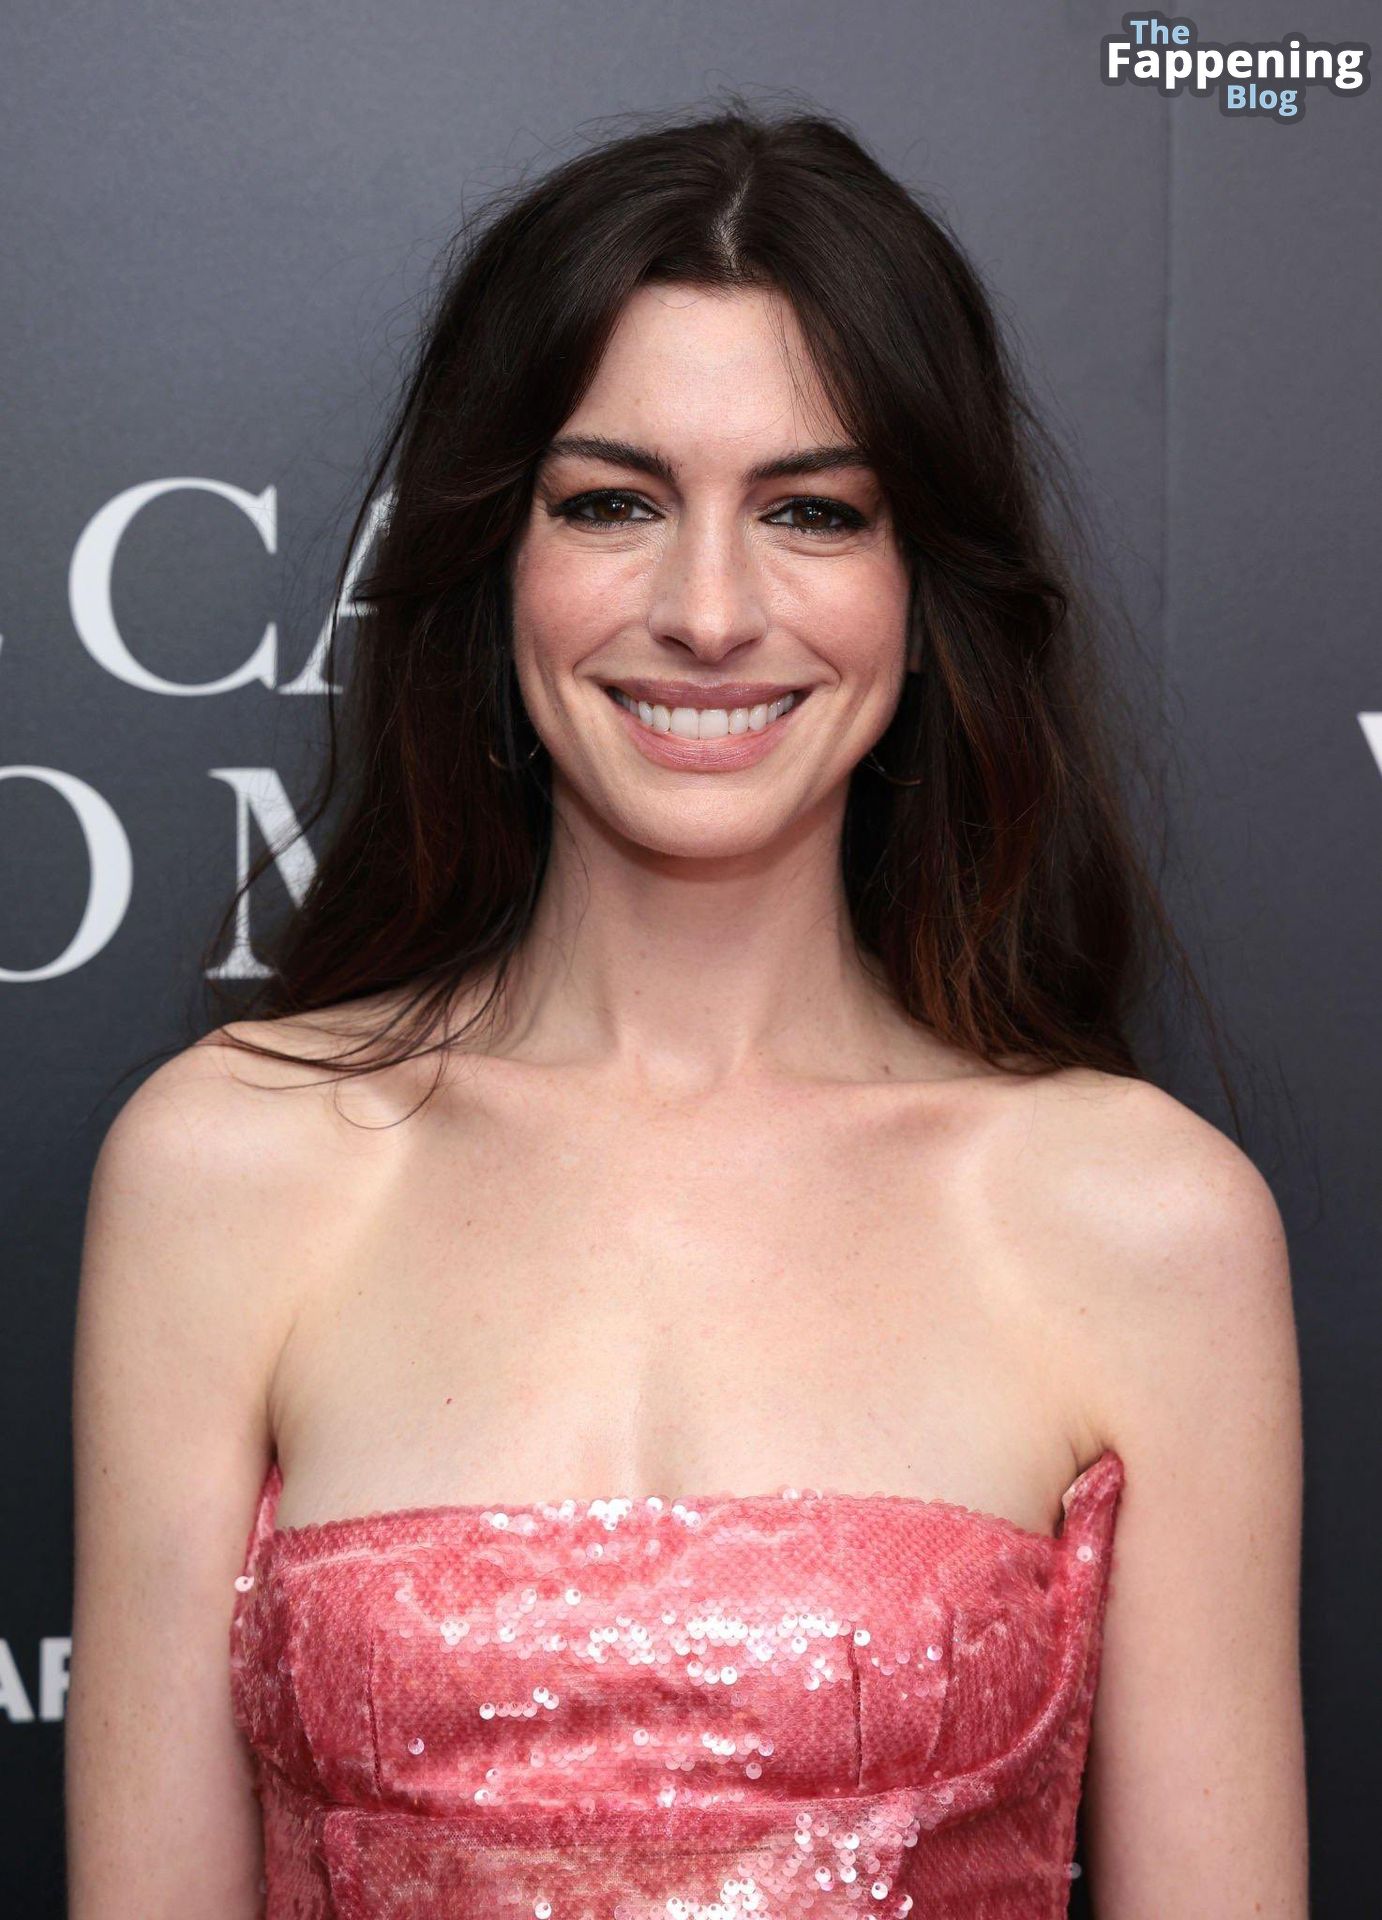 Anne-Hathaway-Sexy-3-The-Fappening-Blog.jpg